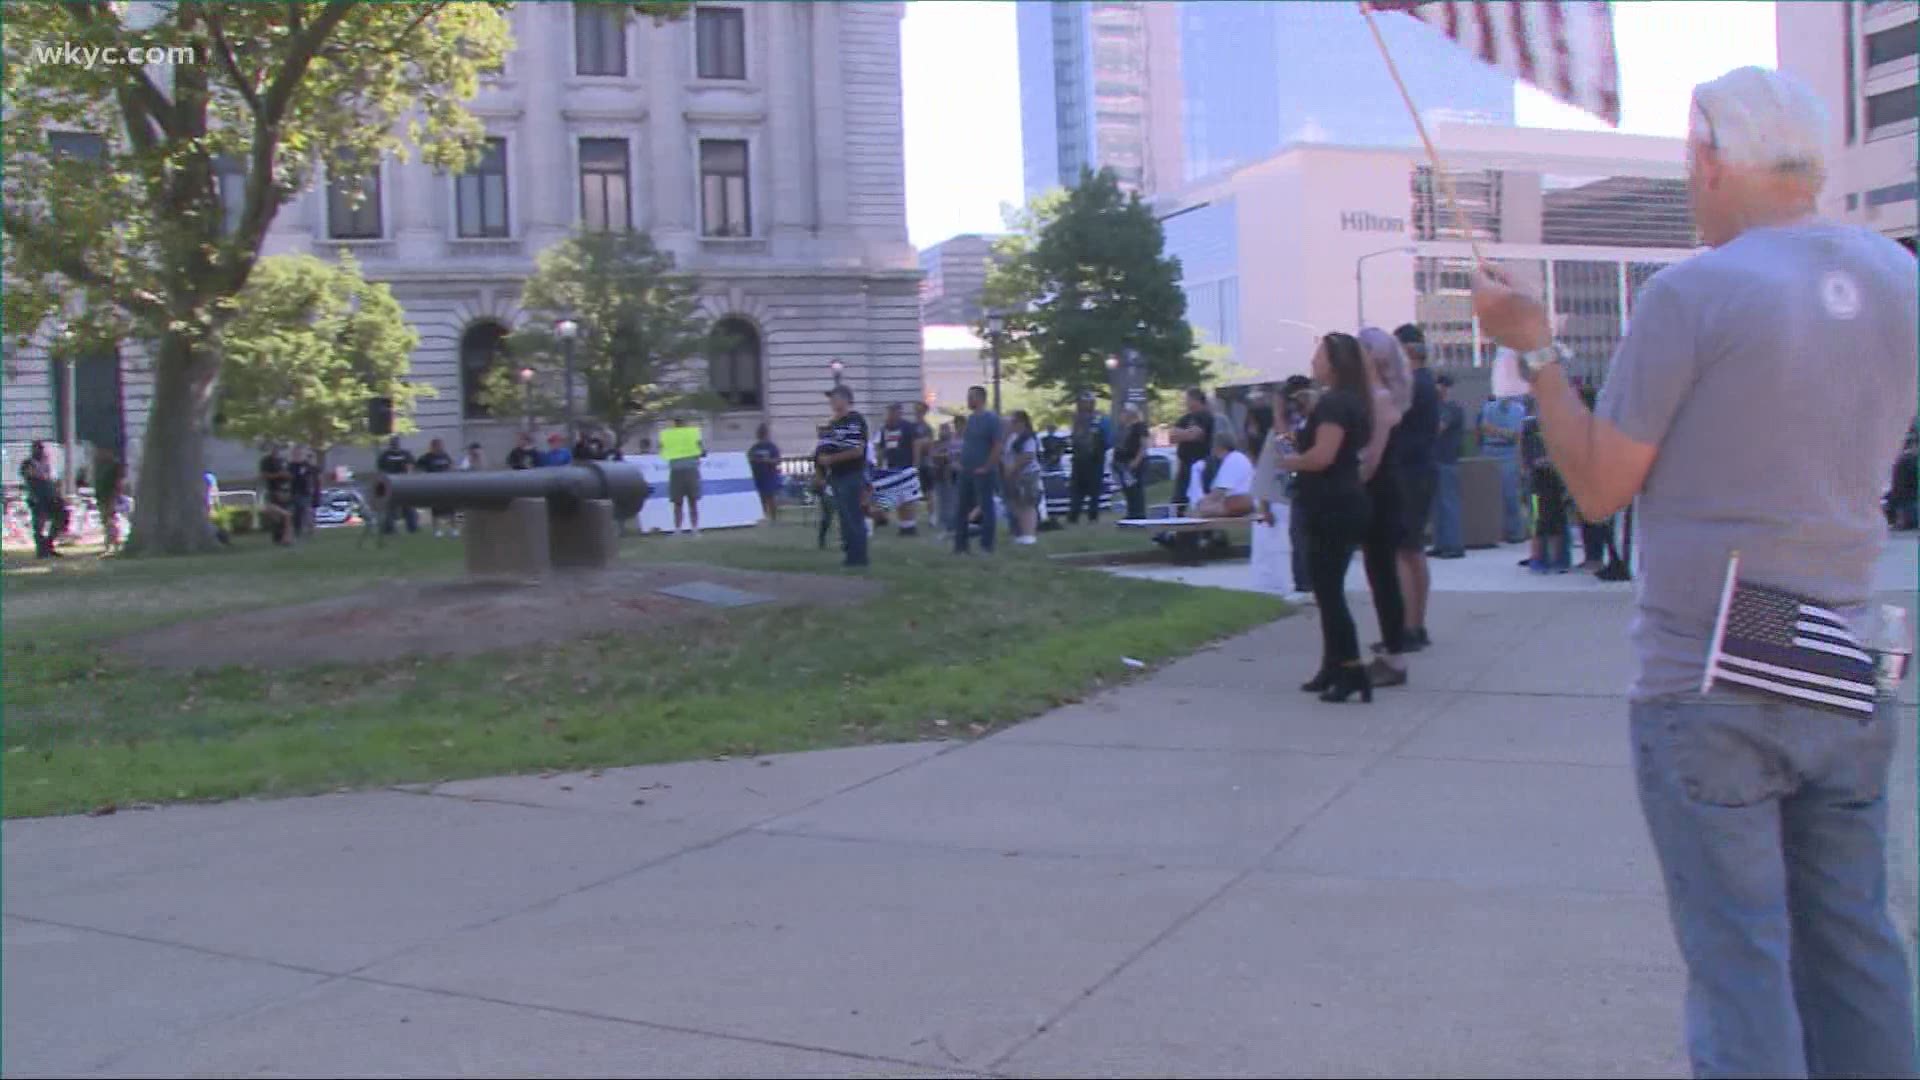 A counter-rally also took place at a nearby downtown location. Both were peaceful demonstrations.